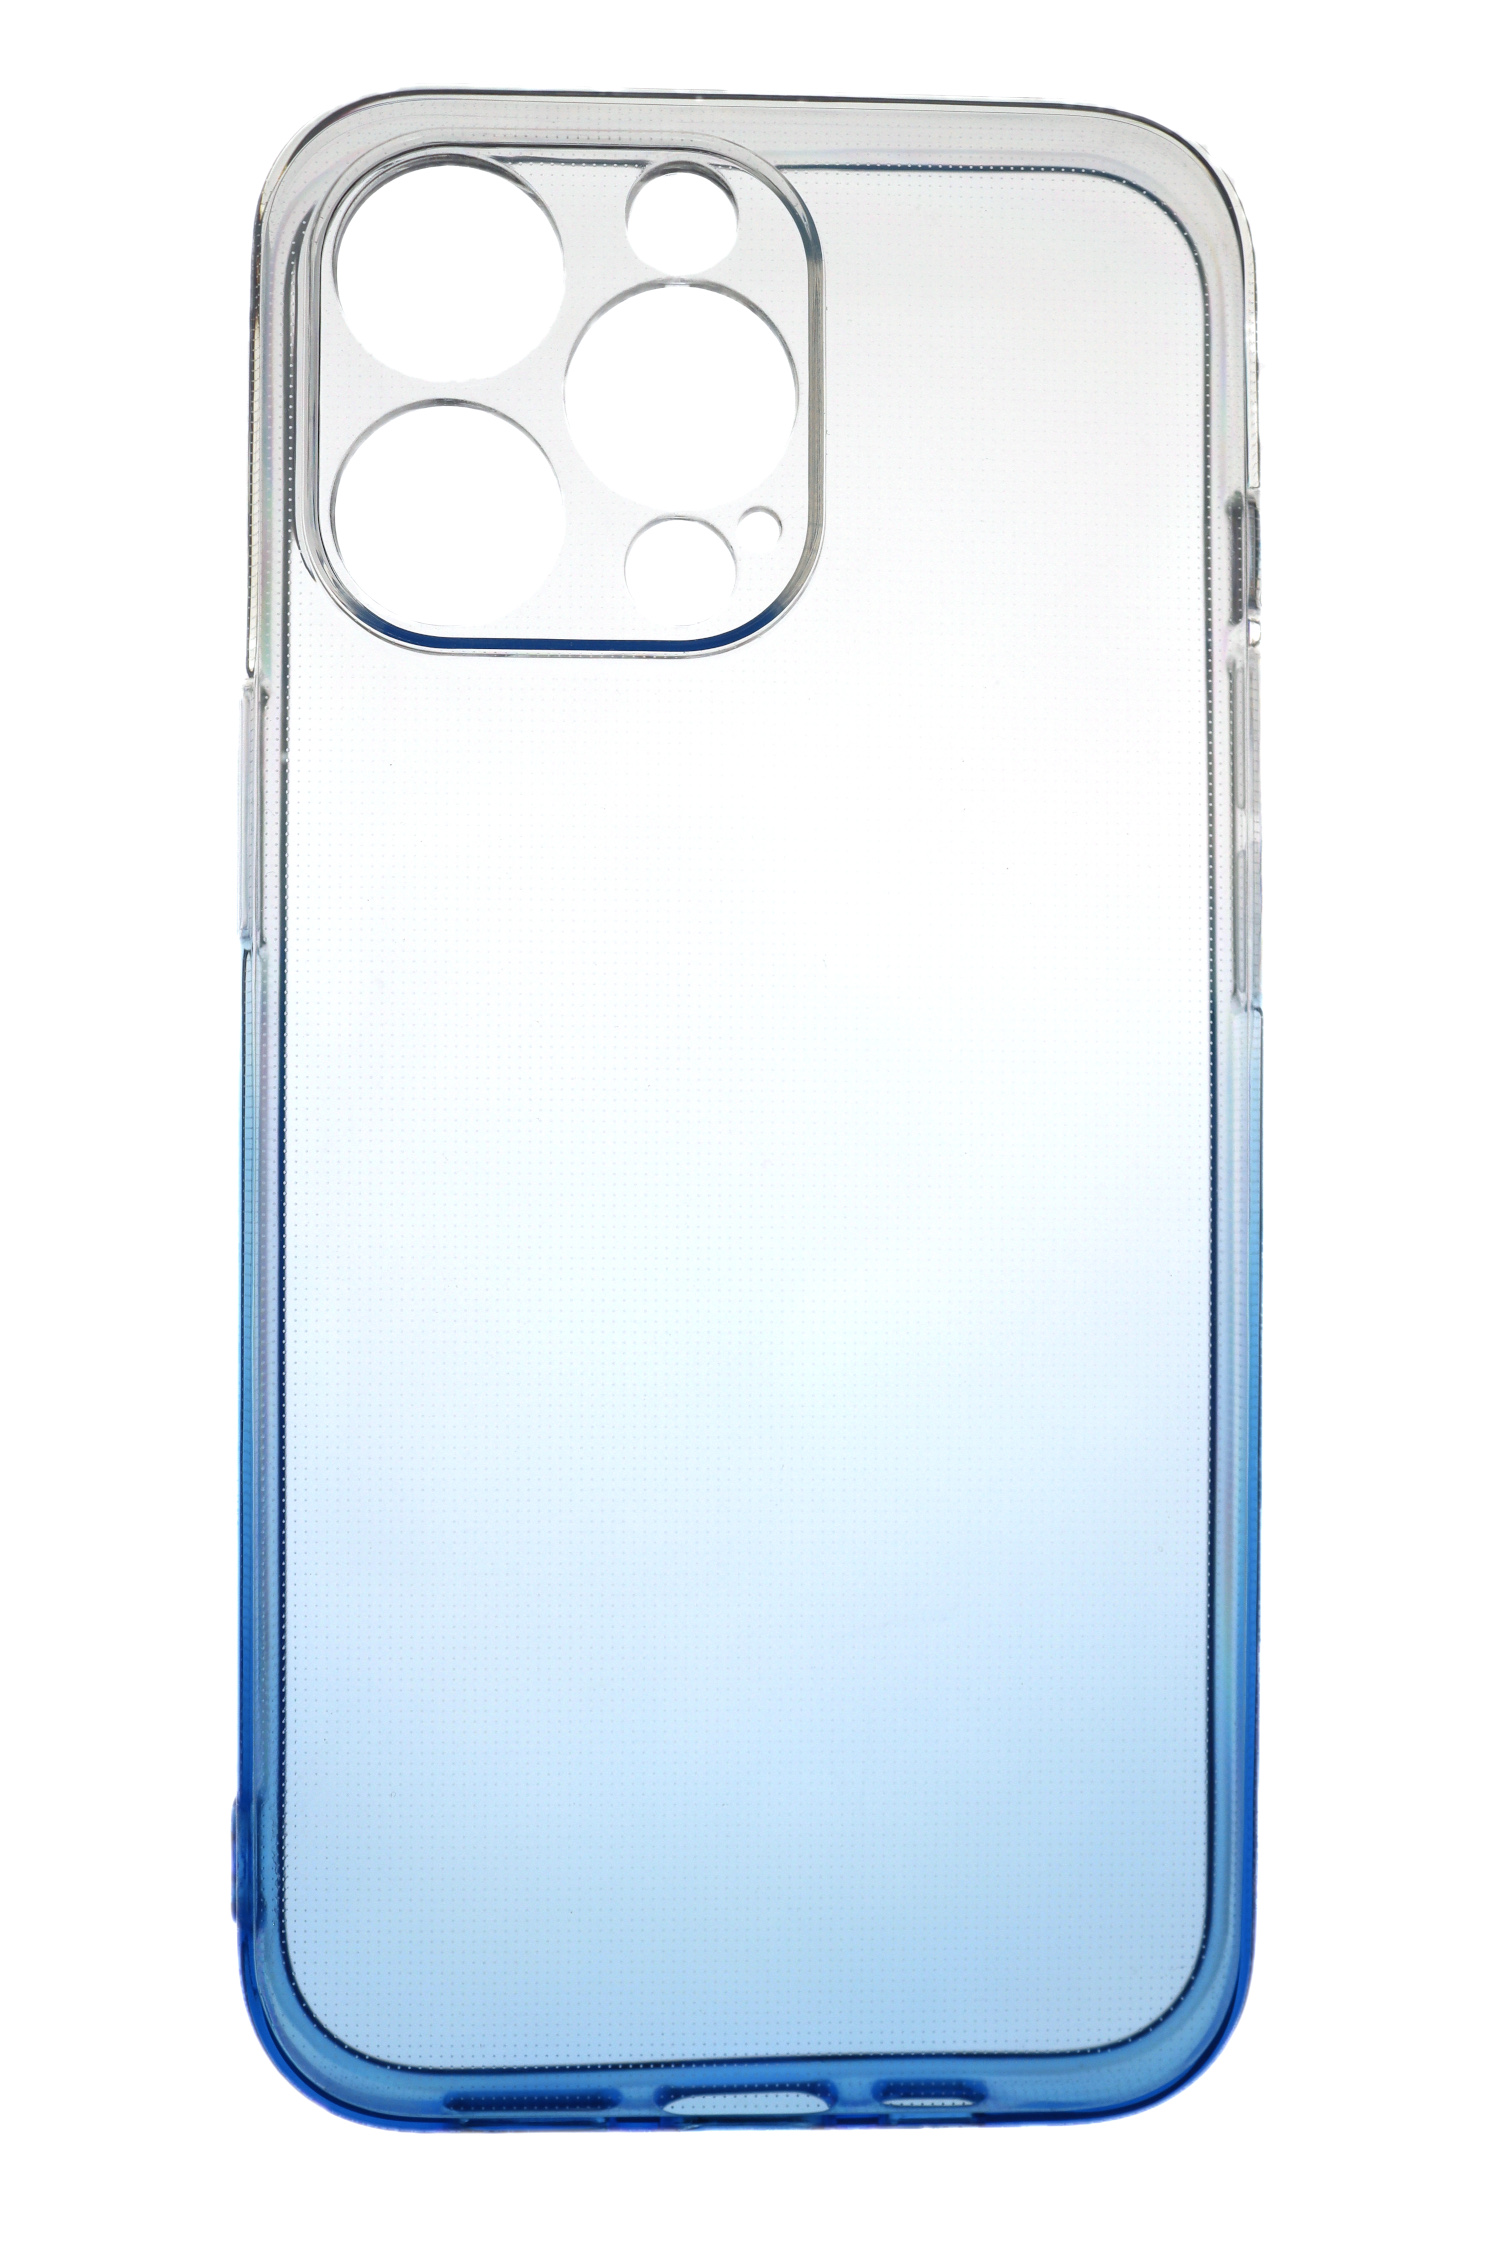 2.0 Max, Backcover, Transparent Apple, TPU 14 Strong, Case Blau, mm Pro iPhone JAMCOVER